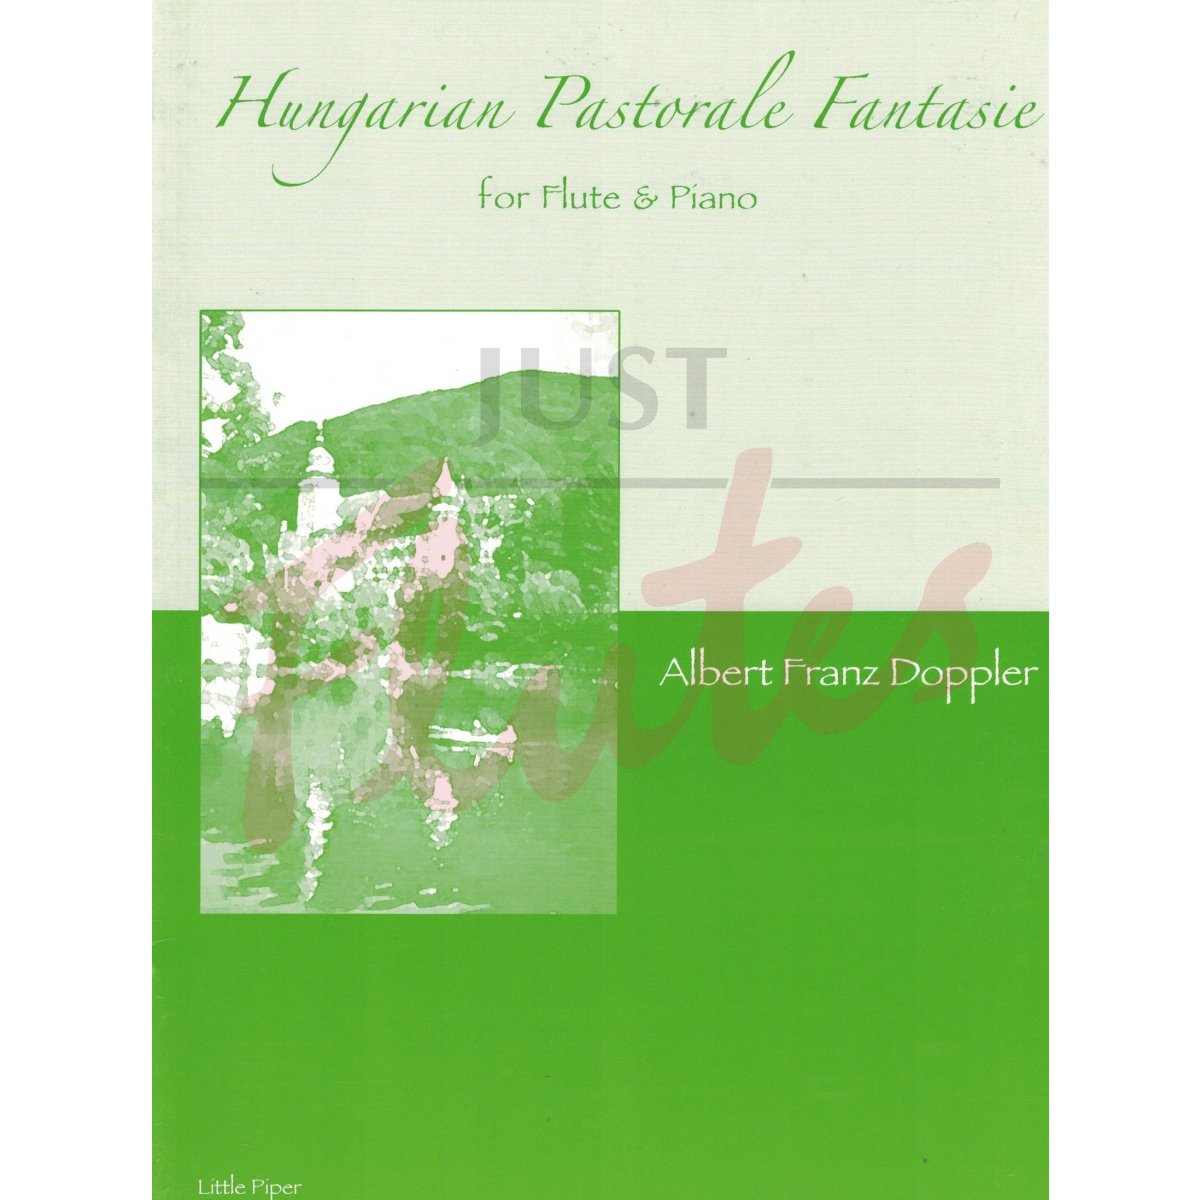 Hungarian Pastorale Fantasie for Flute and Piano